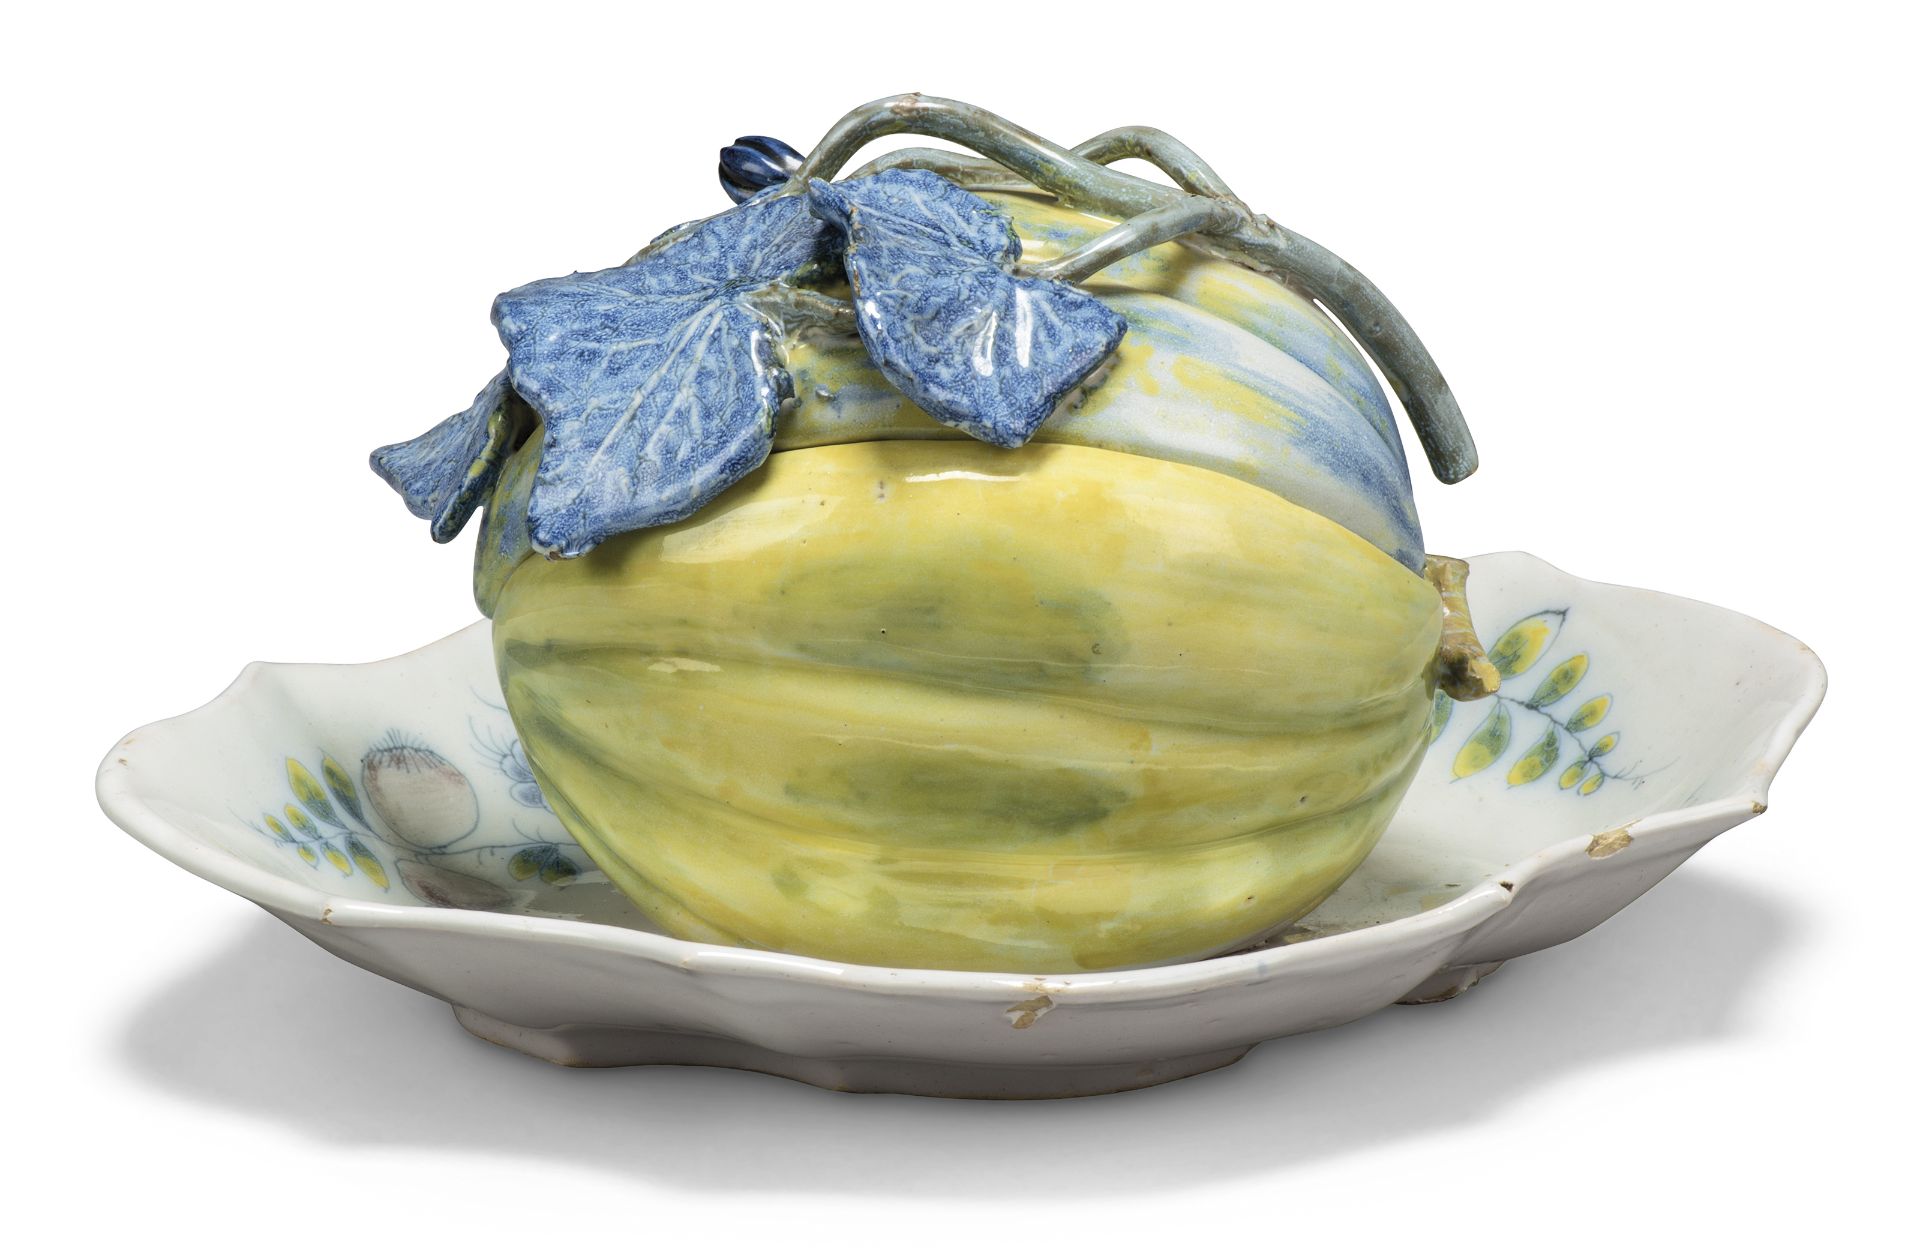 A Göggingen fayence melon tureen and cover with fixed stand, third quarter 18th century, manganes...